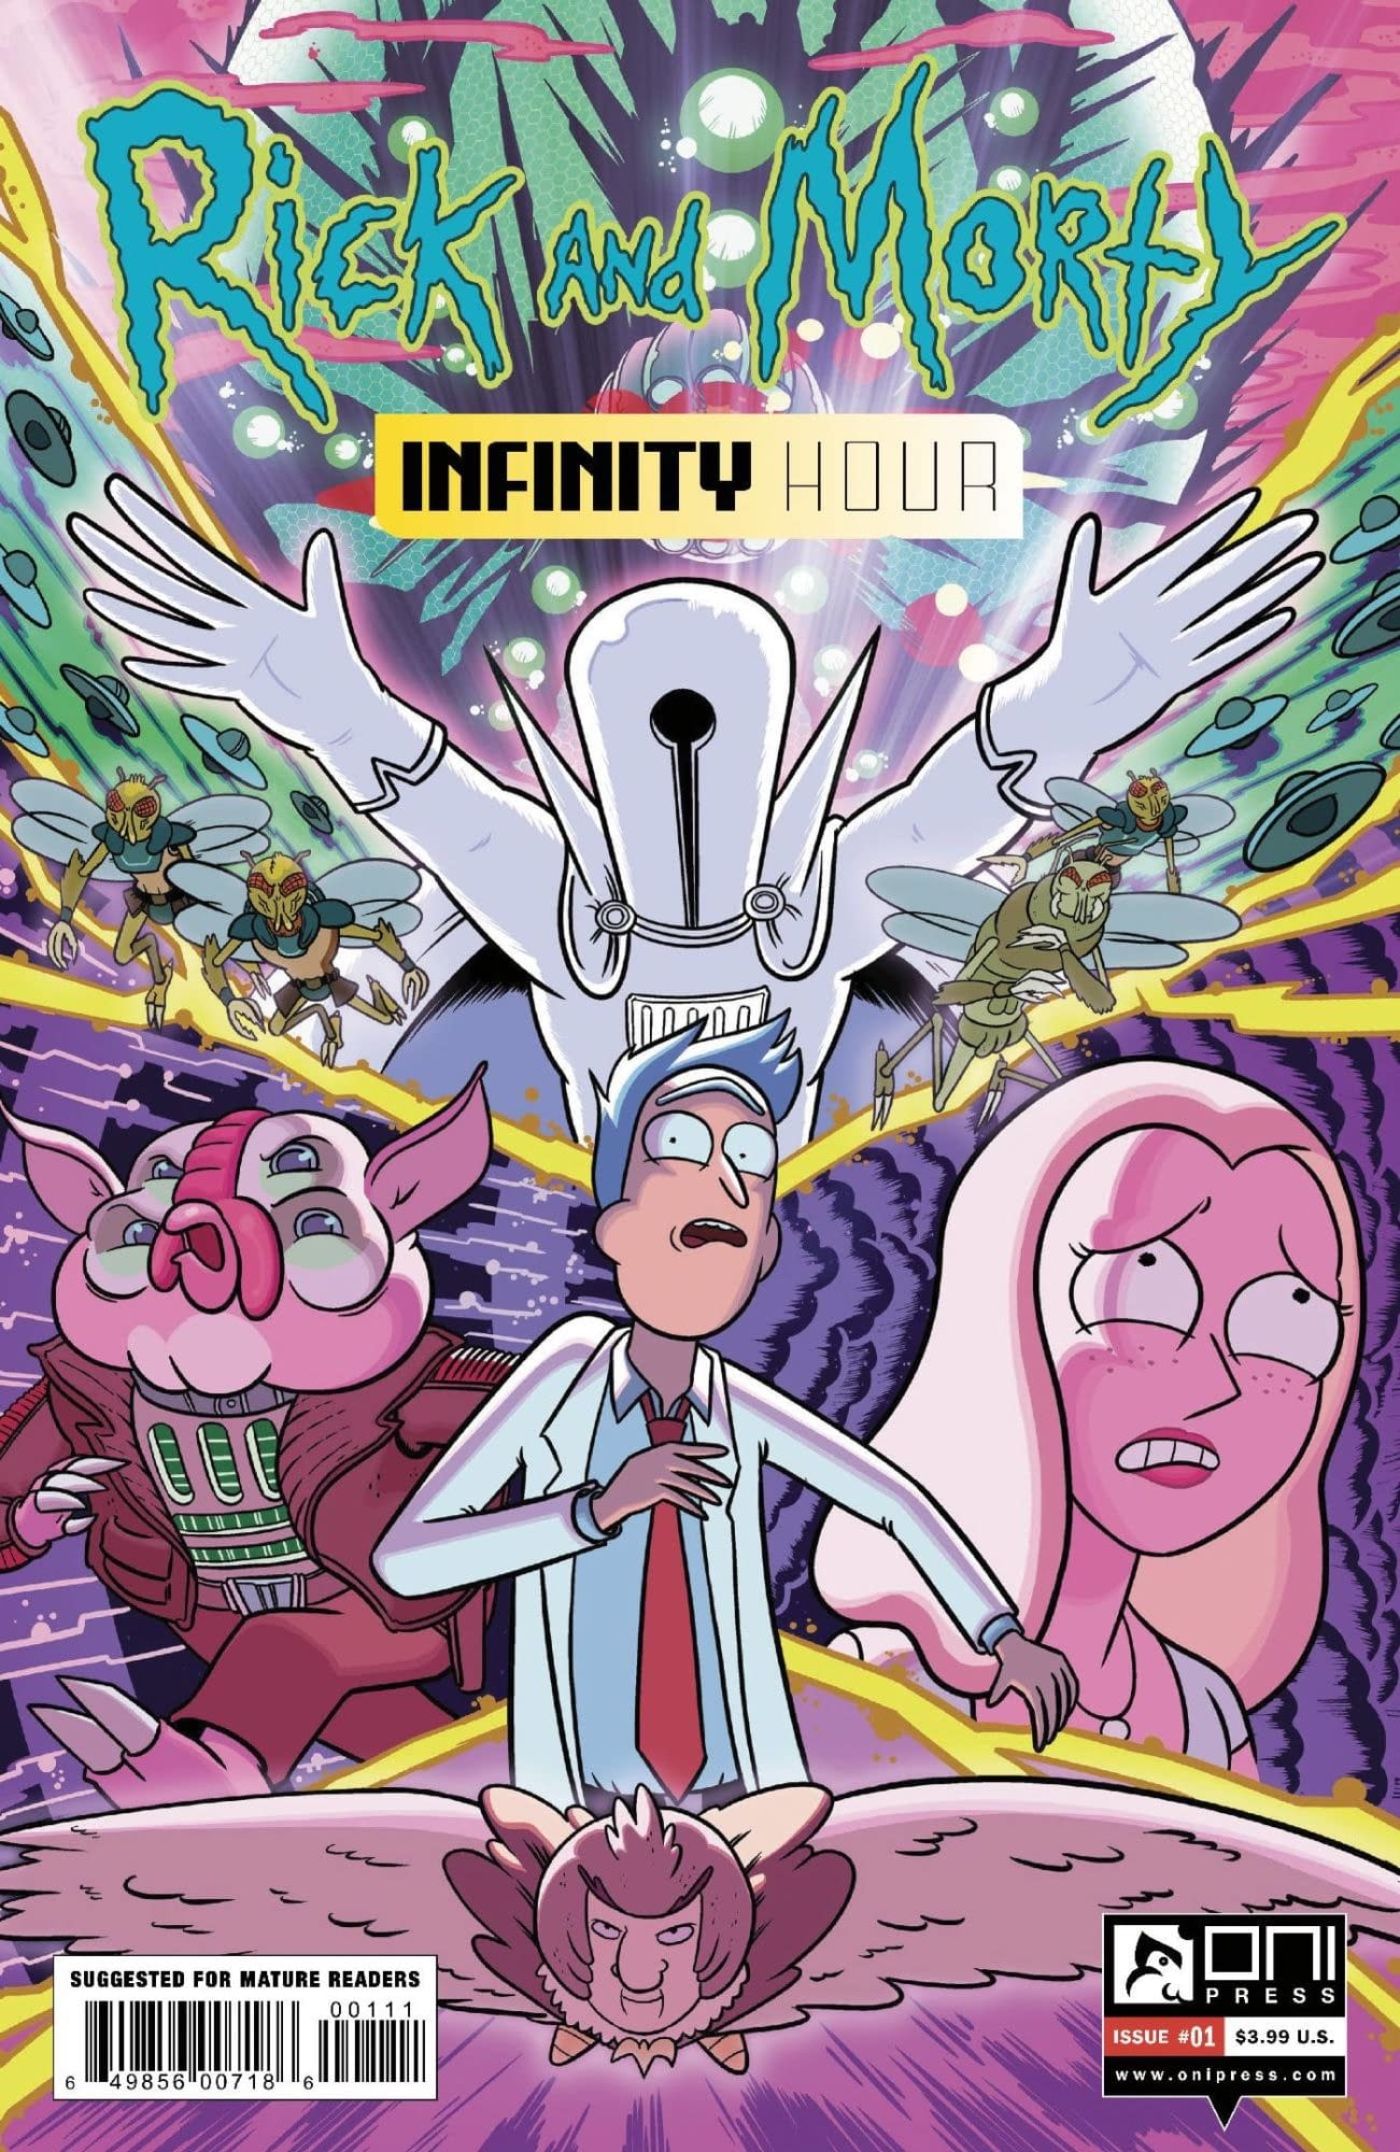 Rick’s Background Before He Met Morty Explored in New Infinity Hour Comic